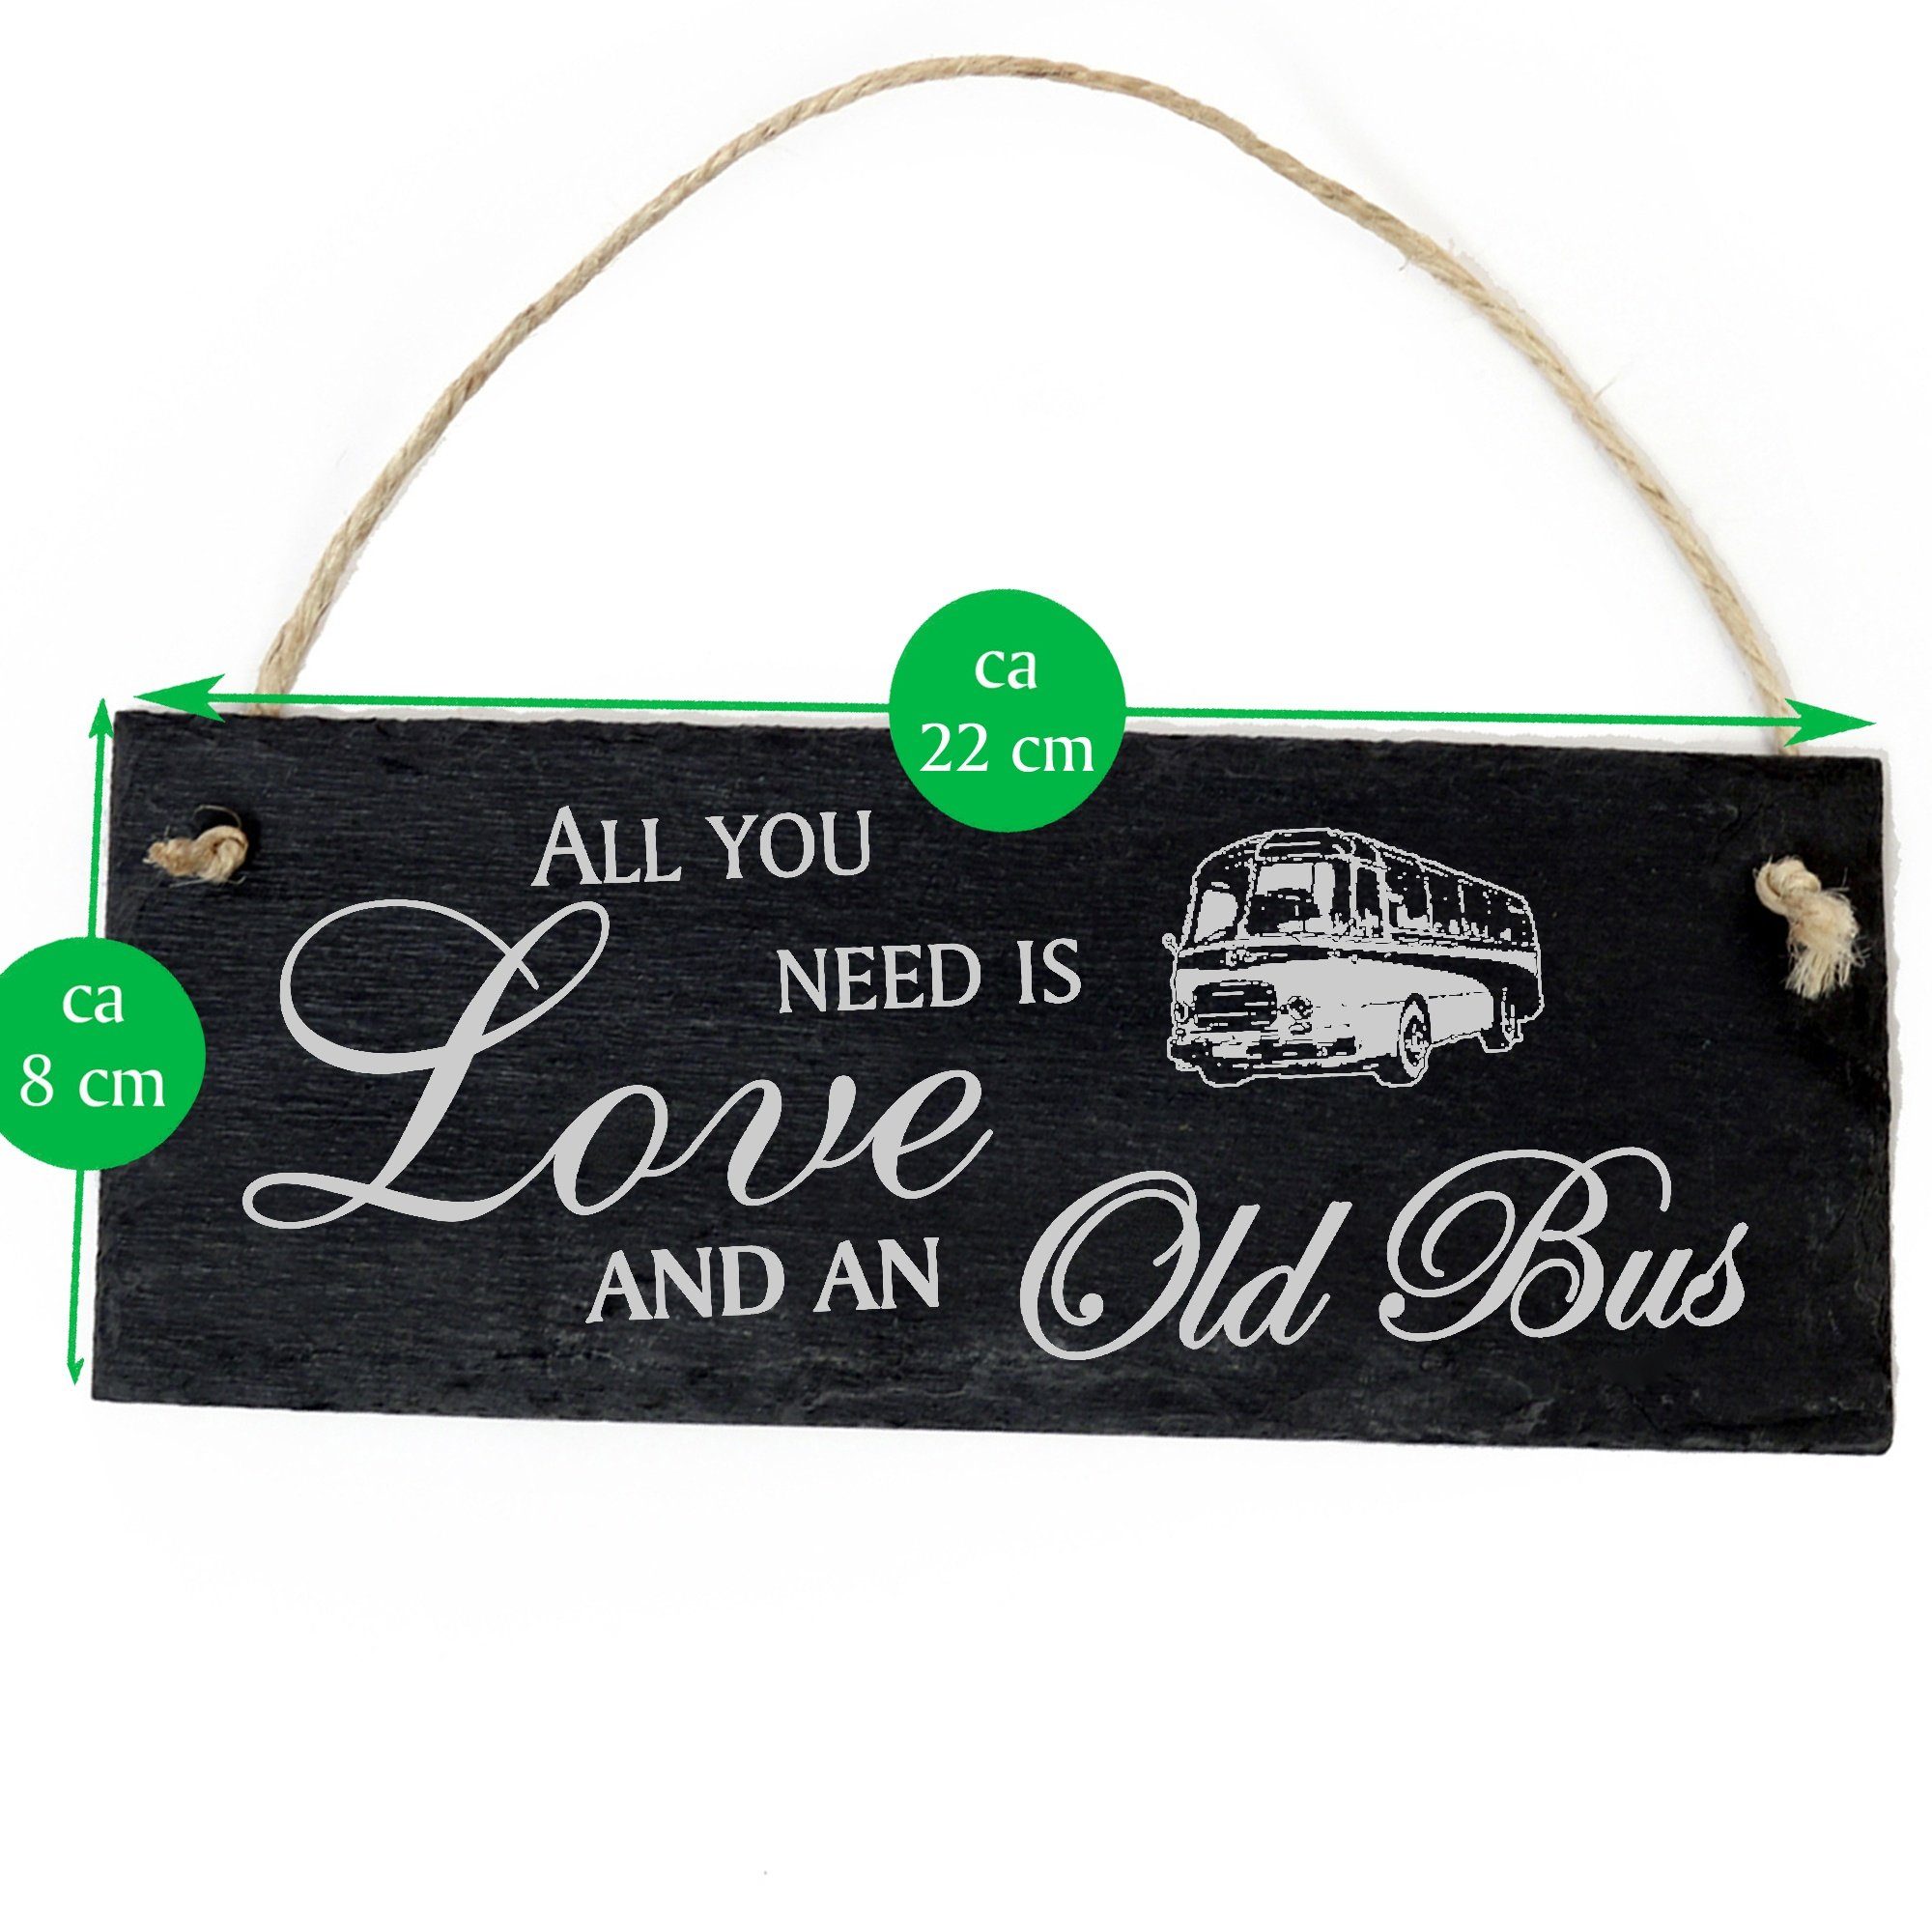 Dekolando Hängedekoration alter Bus need and Love you is Old Bus an 22x8cm All